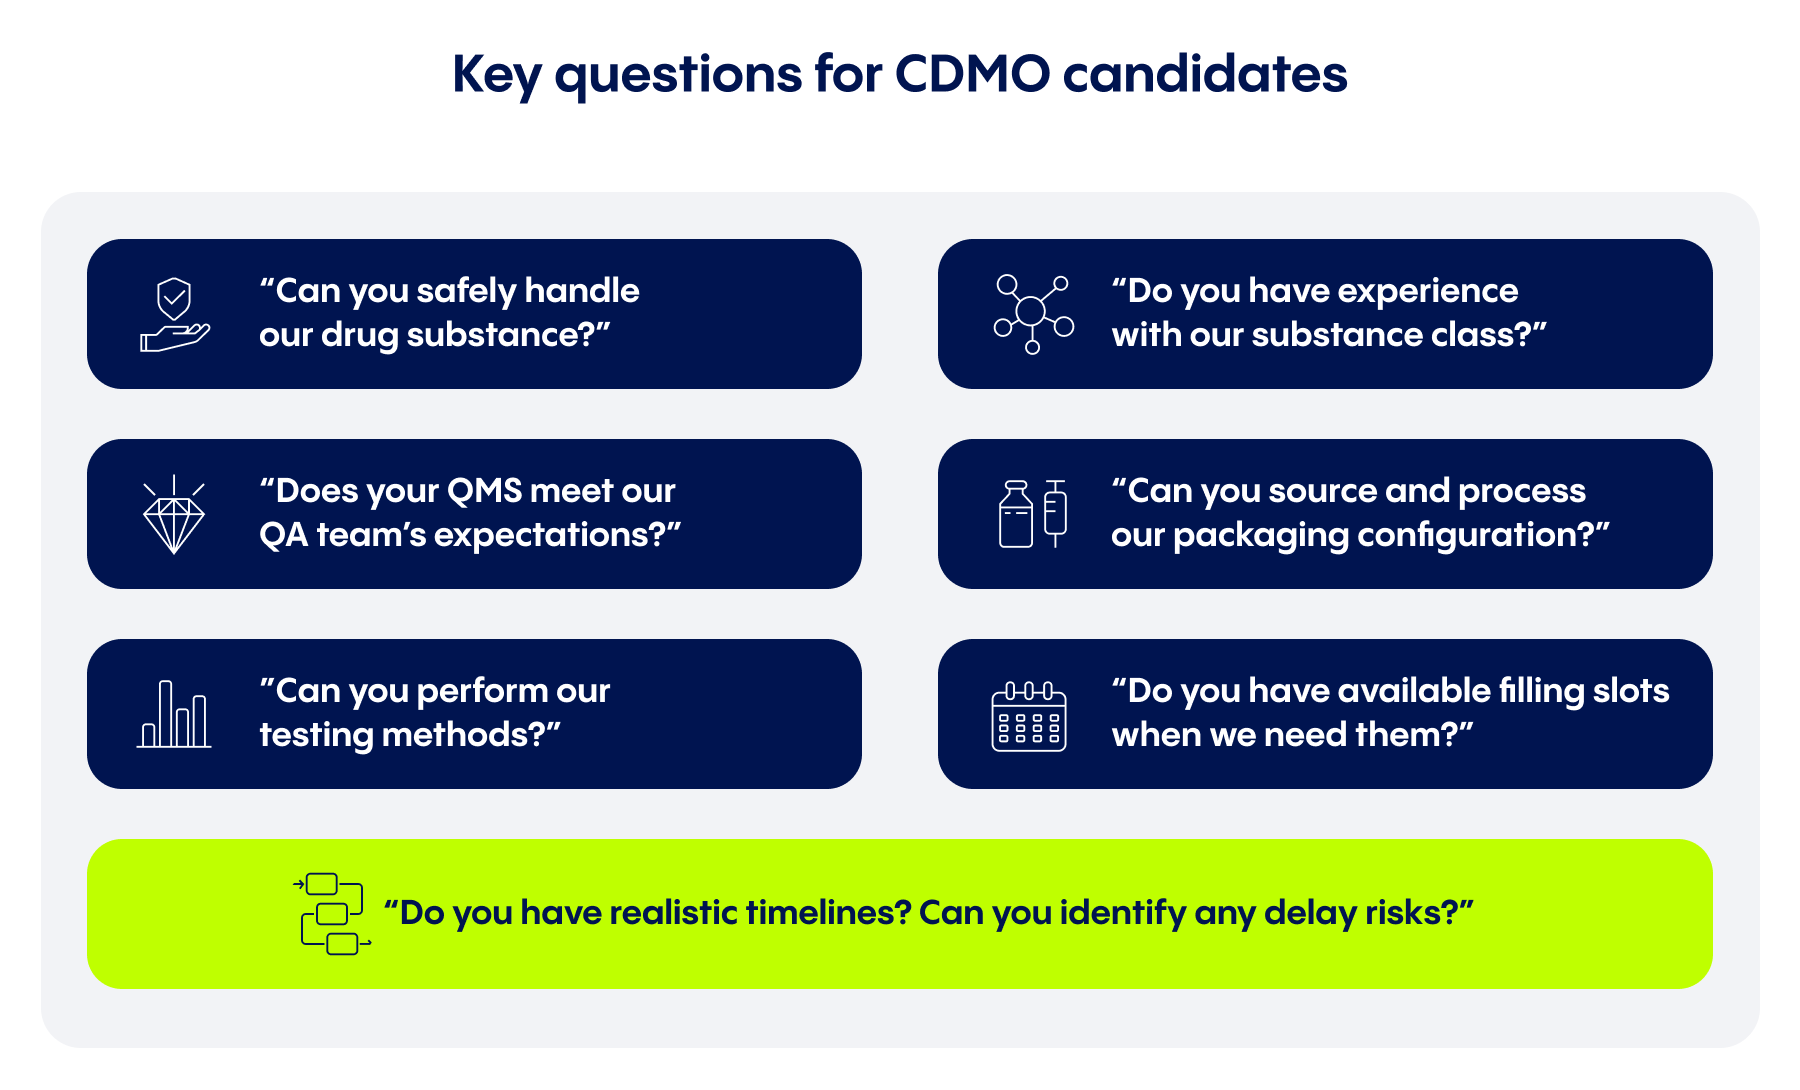 Key questions for CDMO candidates